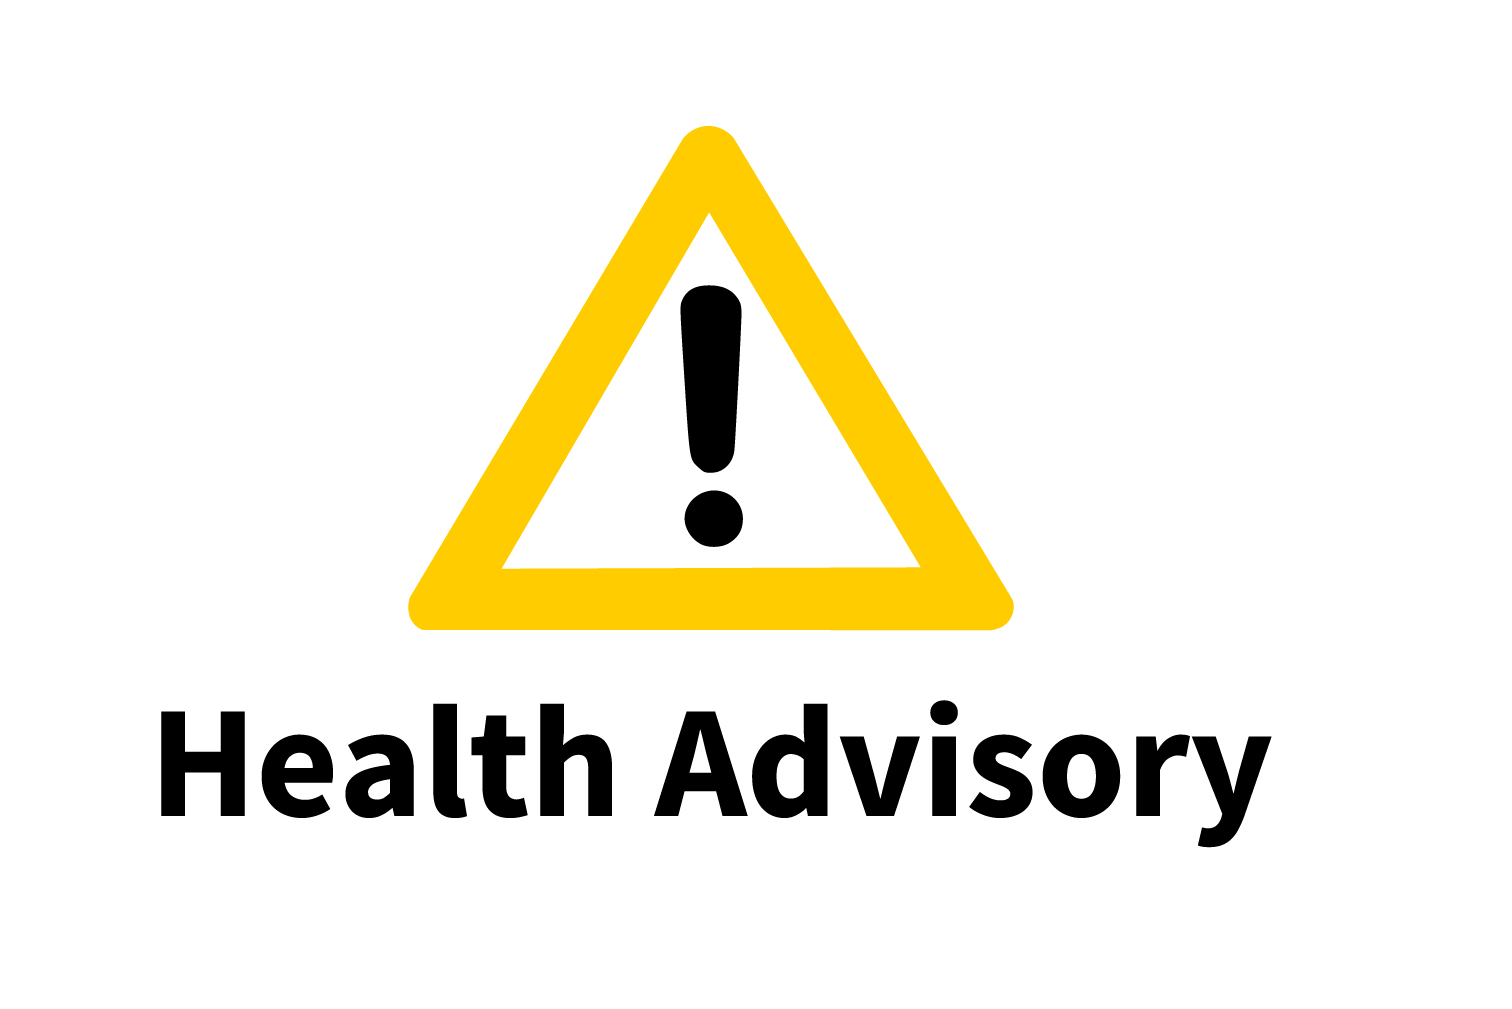 Yellow triangle with black exclamation mark in the center and "Health Advisory" underneath